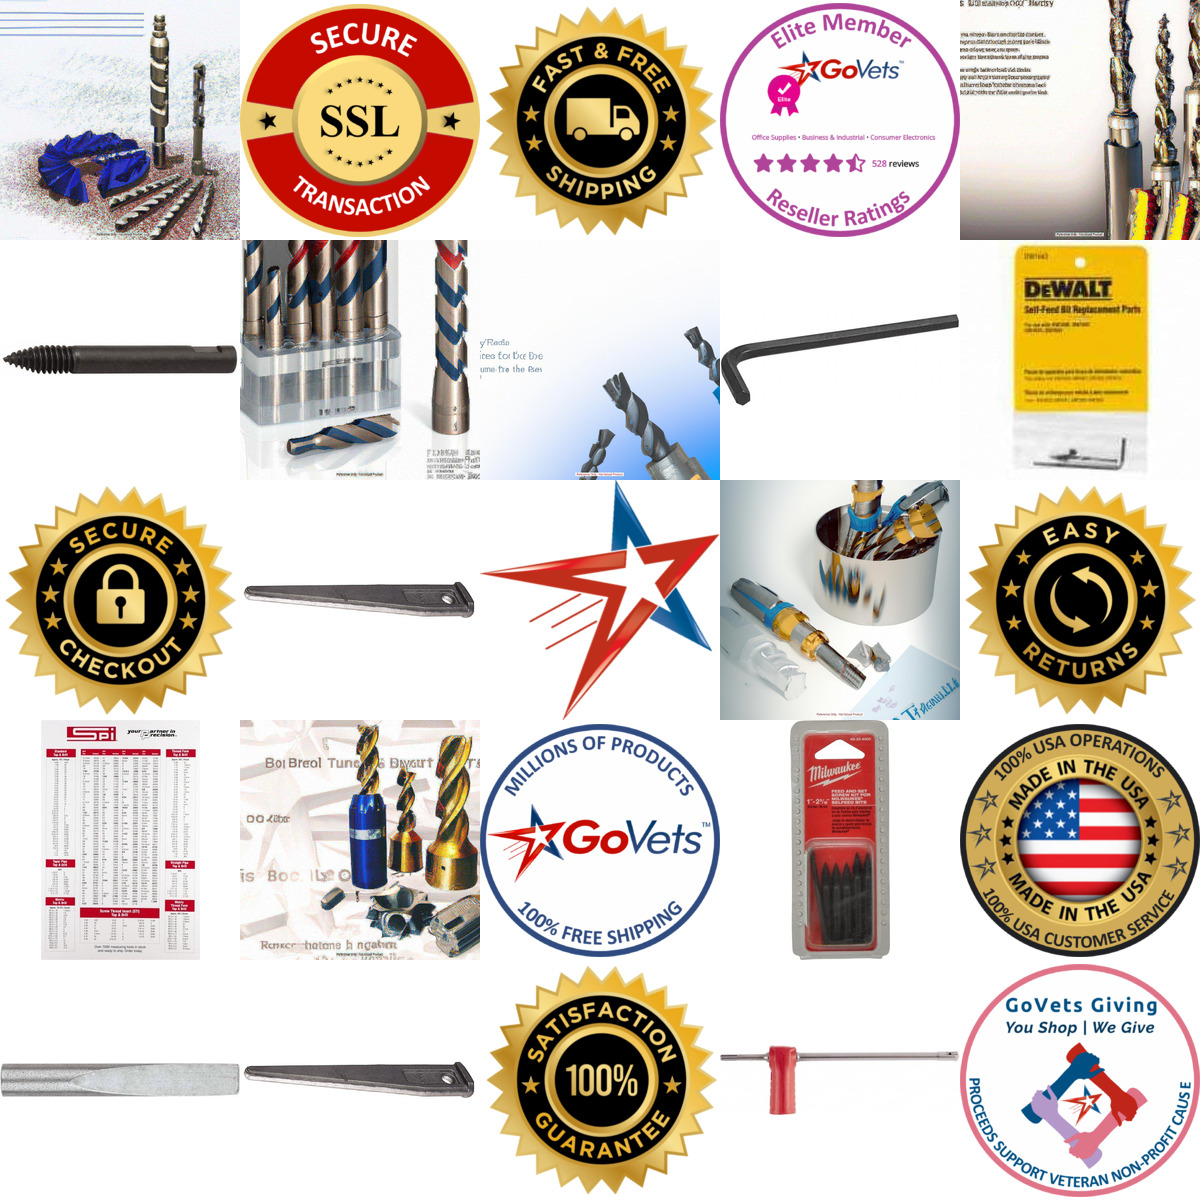 A selection of Drill Bit Replacement Parts products on GoVets